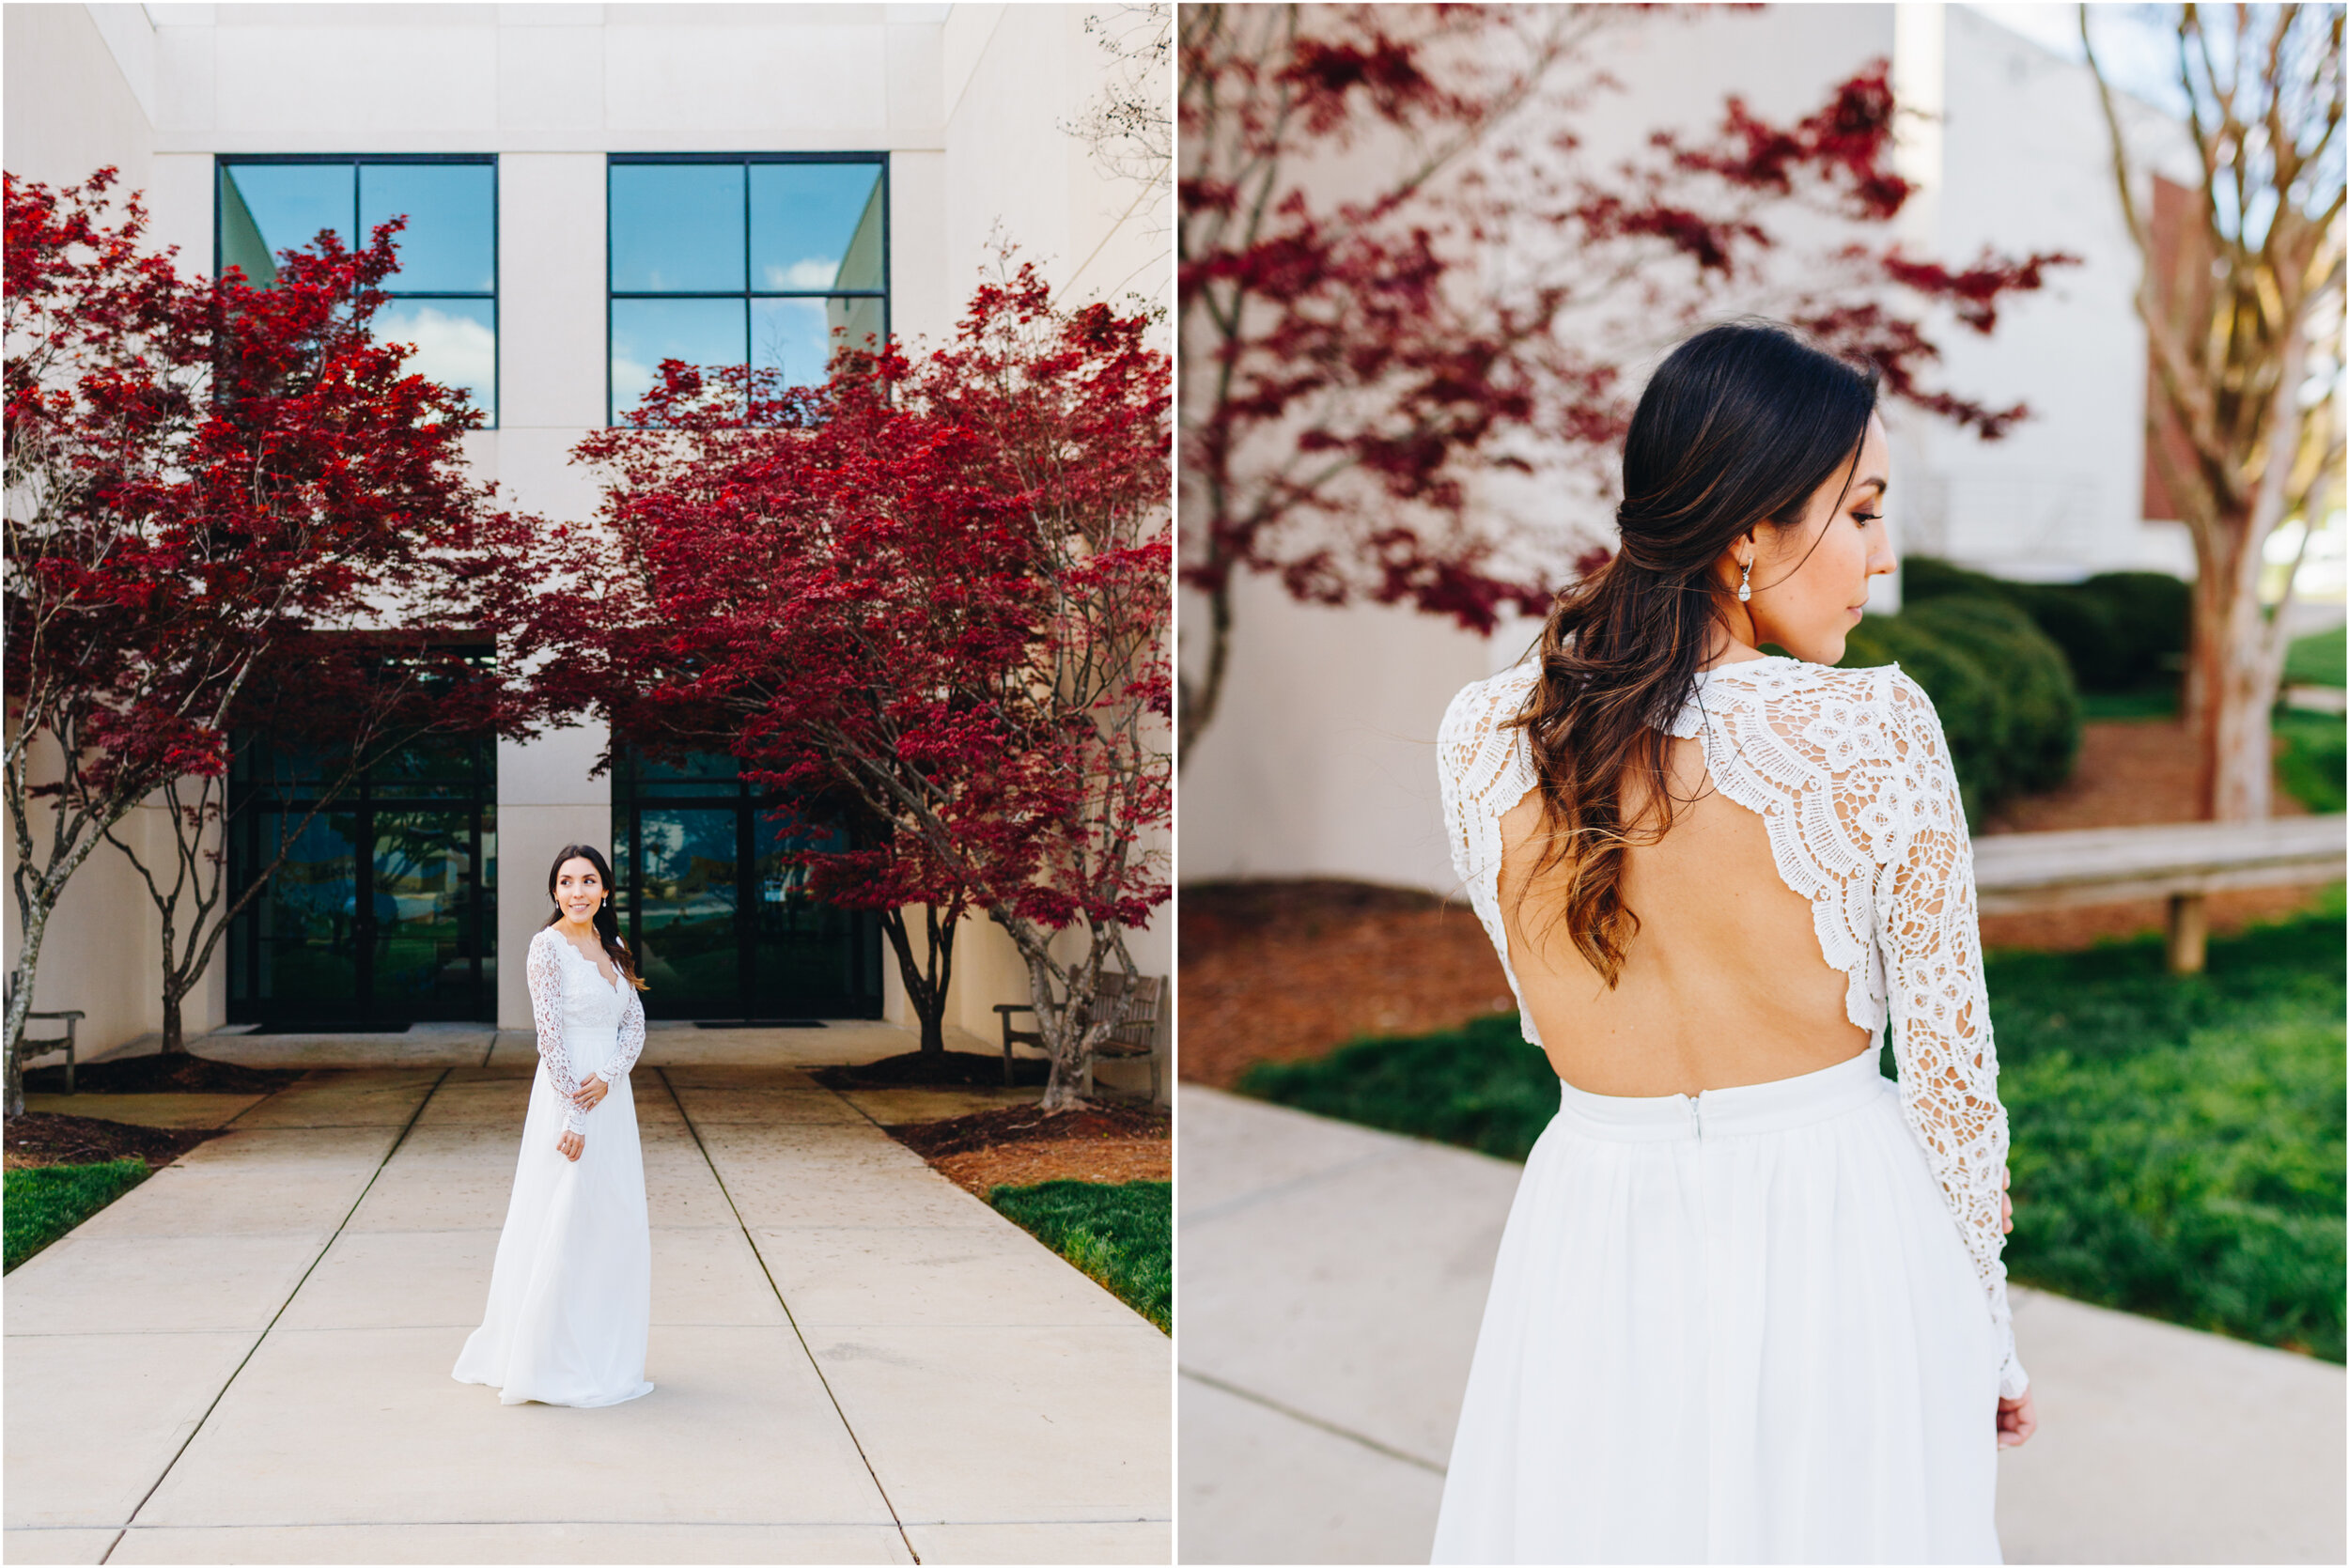 Bridal Portraits with lace back dress